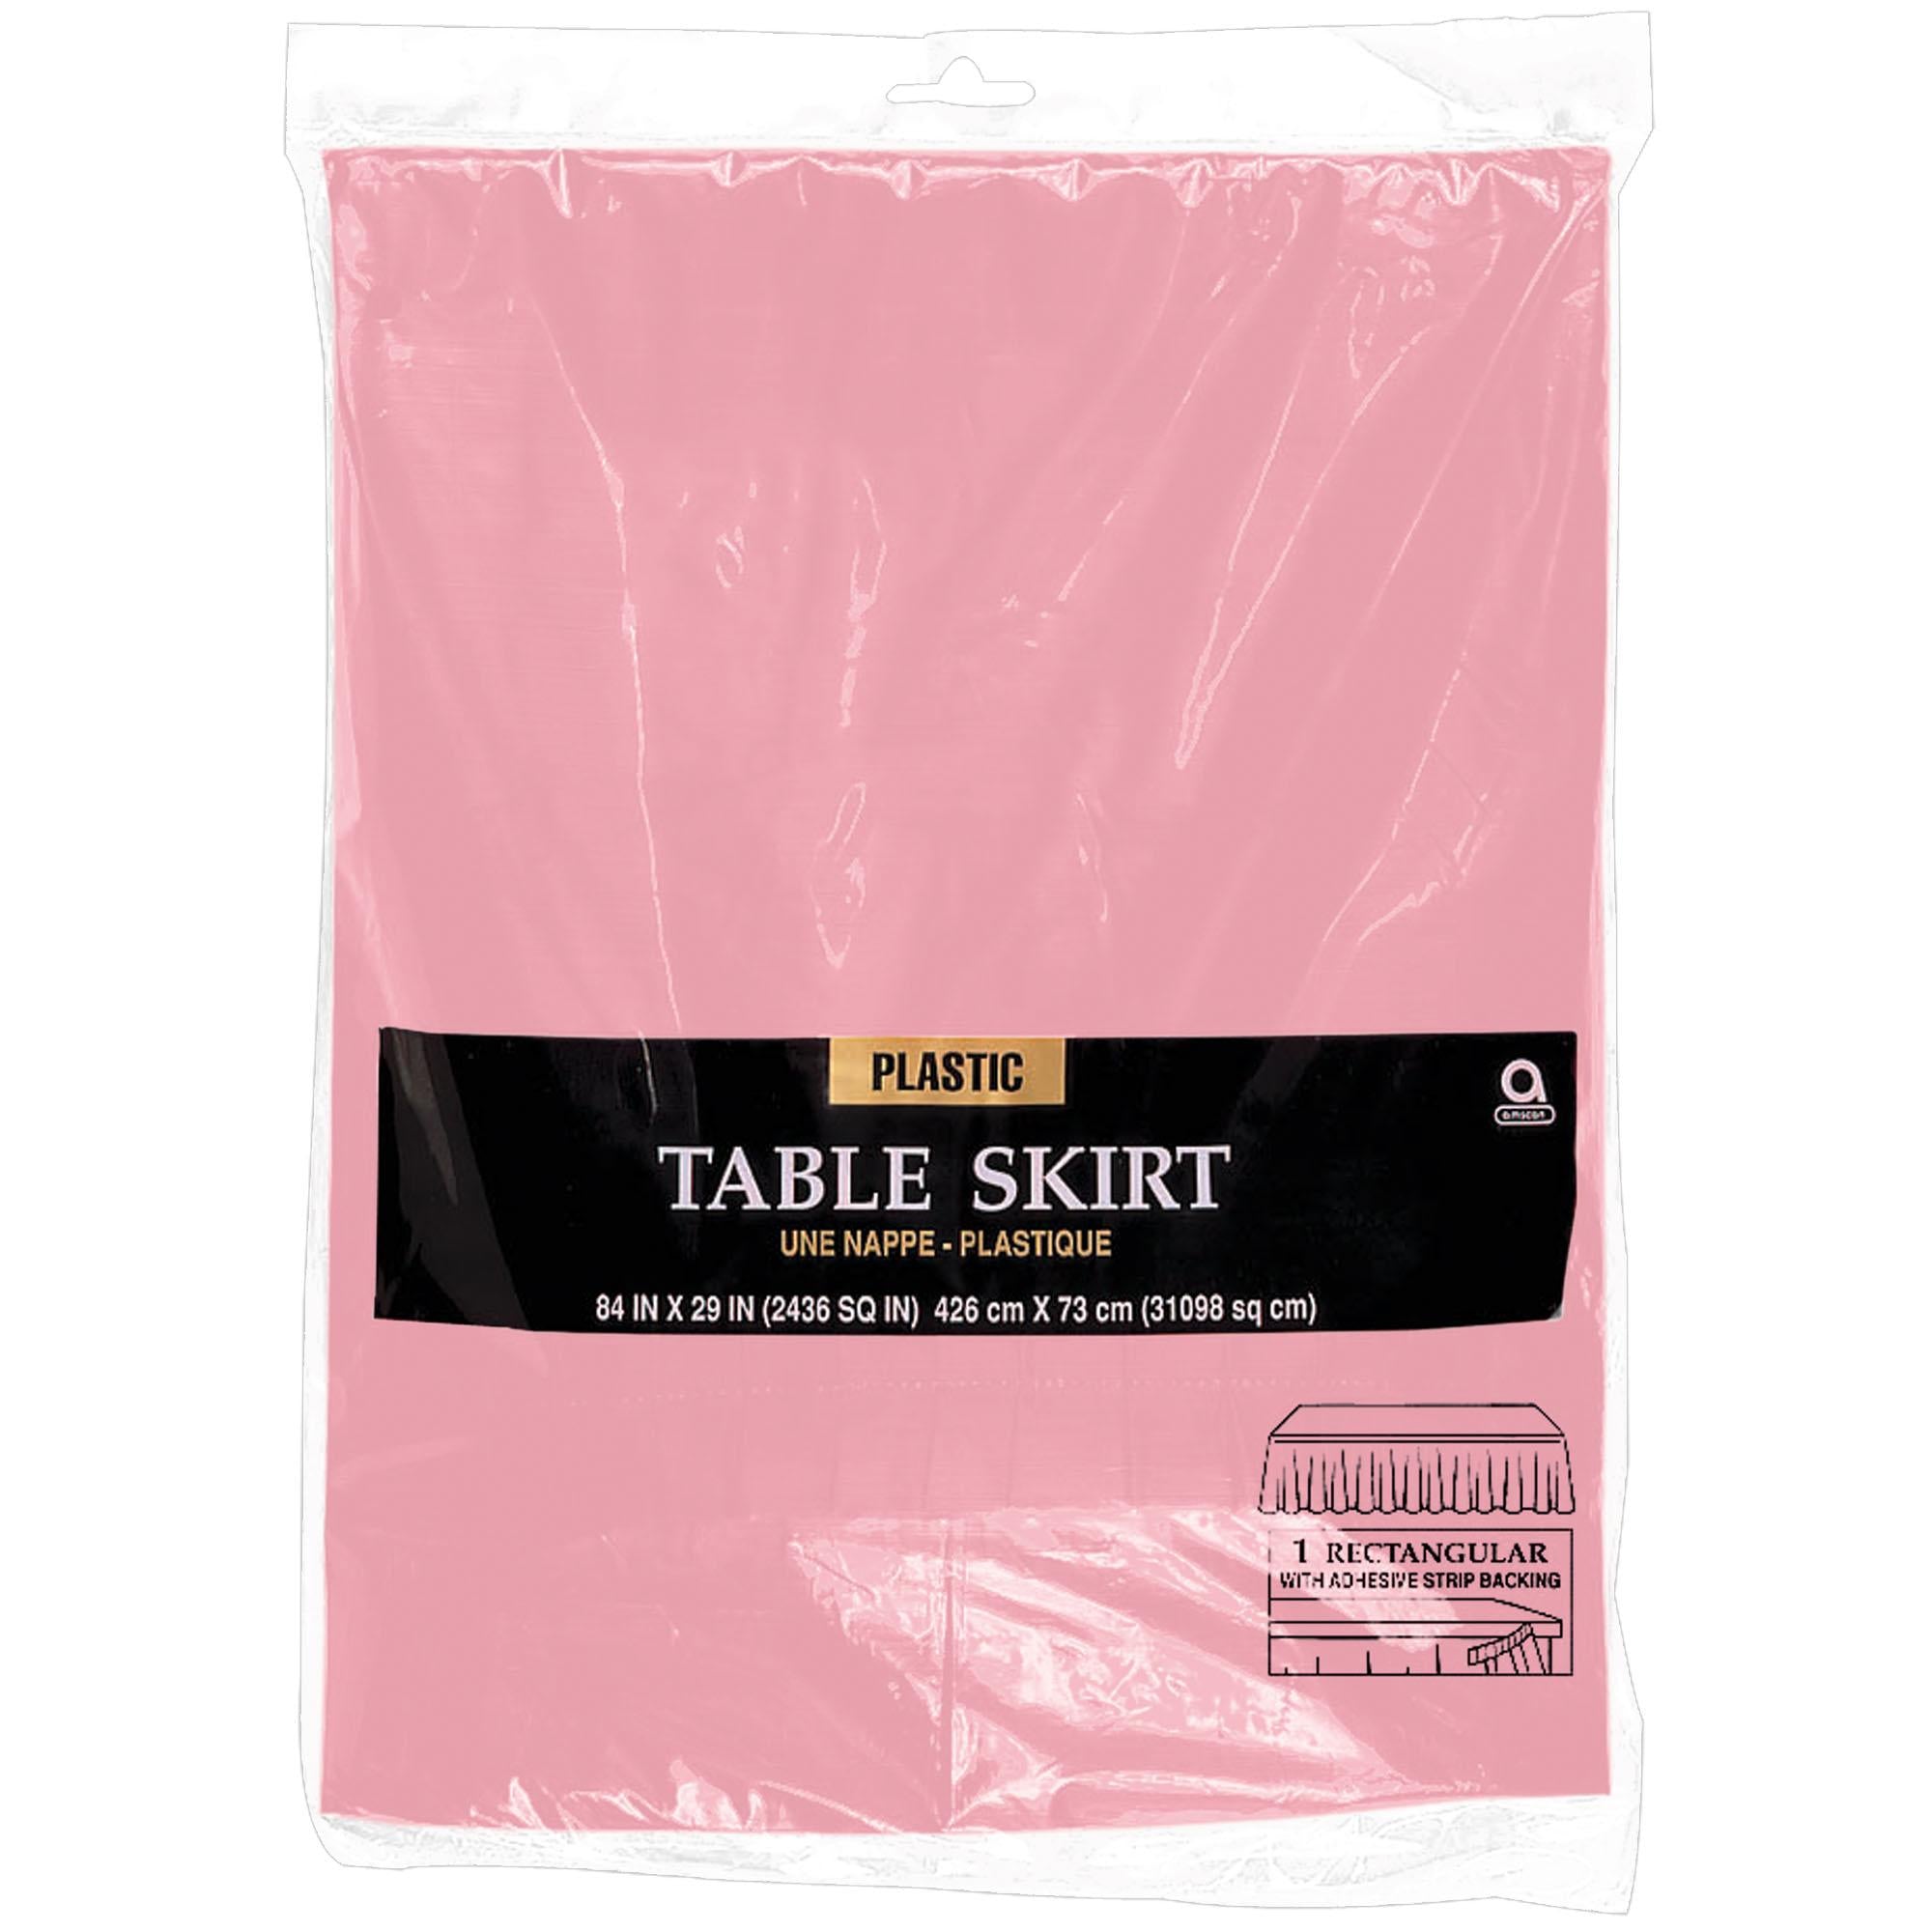 New Pink Table Skirt 14ft x 29in Solid Tableware - Party Centre